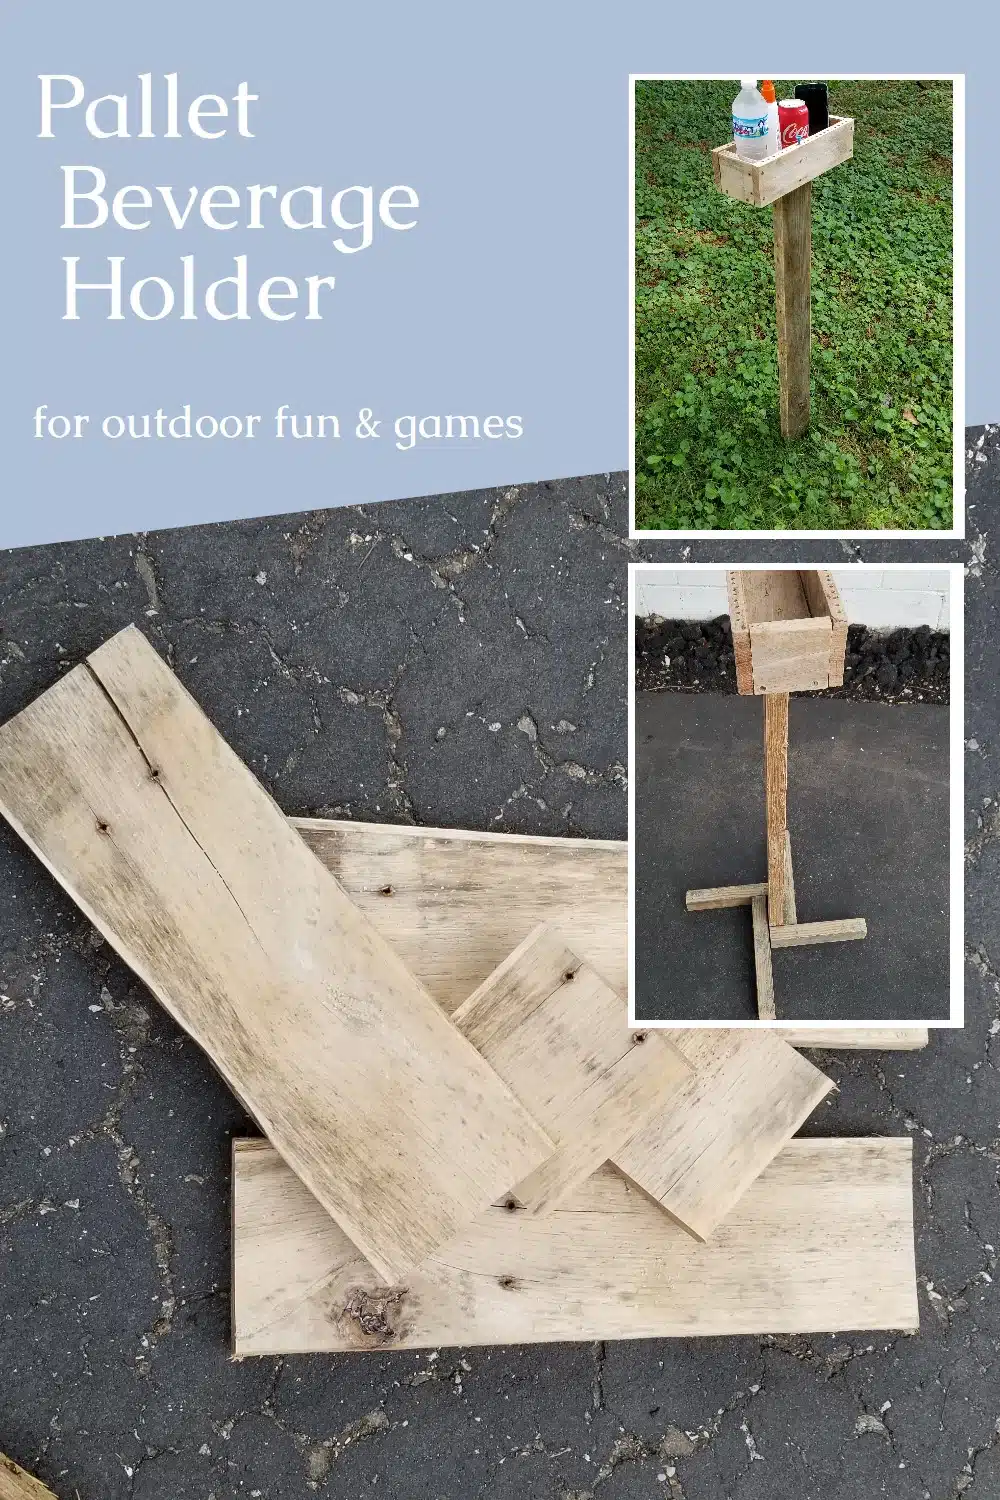 Make a beverage holder with score pegs for outdoor game play. Customize your beverage holder for the yard or on pavement for ping pong games in the garage. Step by step directions to complete this easy weekend project. via @repurposedlife